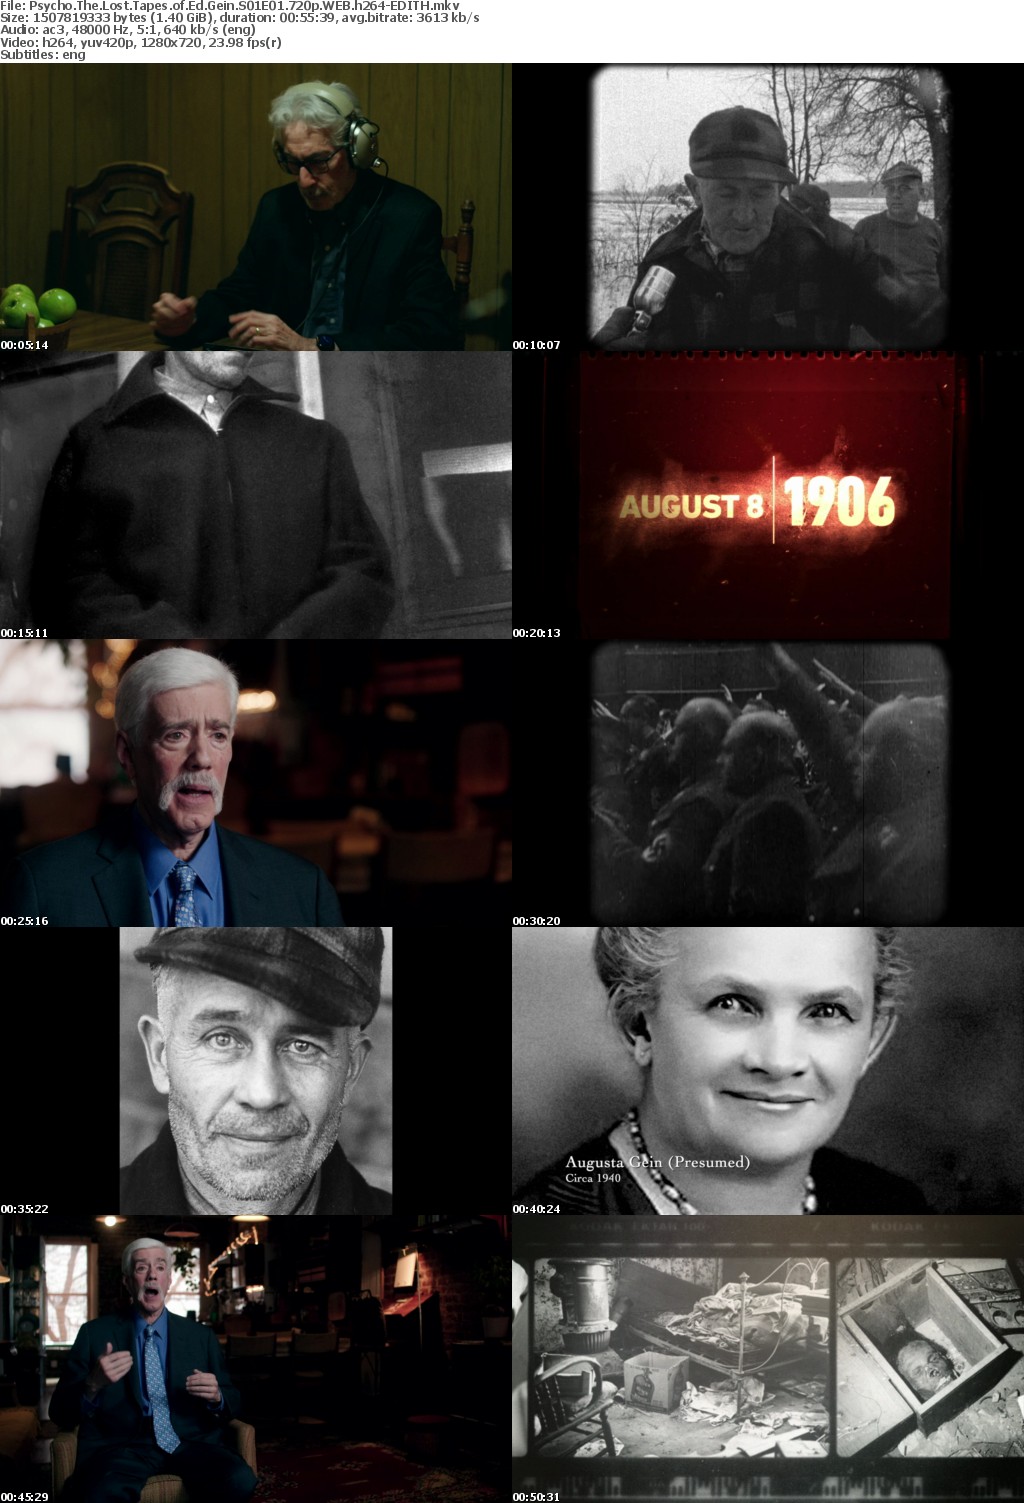 Psycho The Lost Tapes of Ed Gein S01E01 720p WEB h264-EDITH